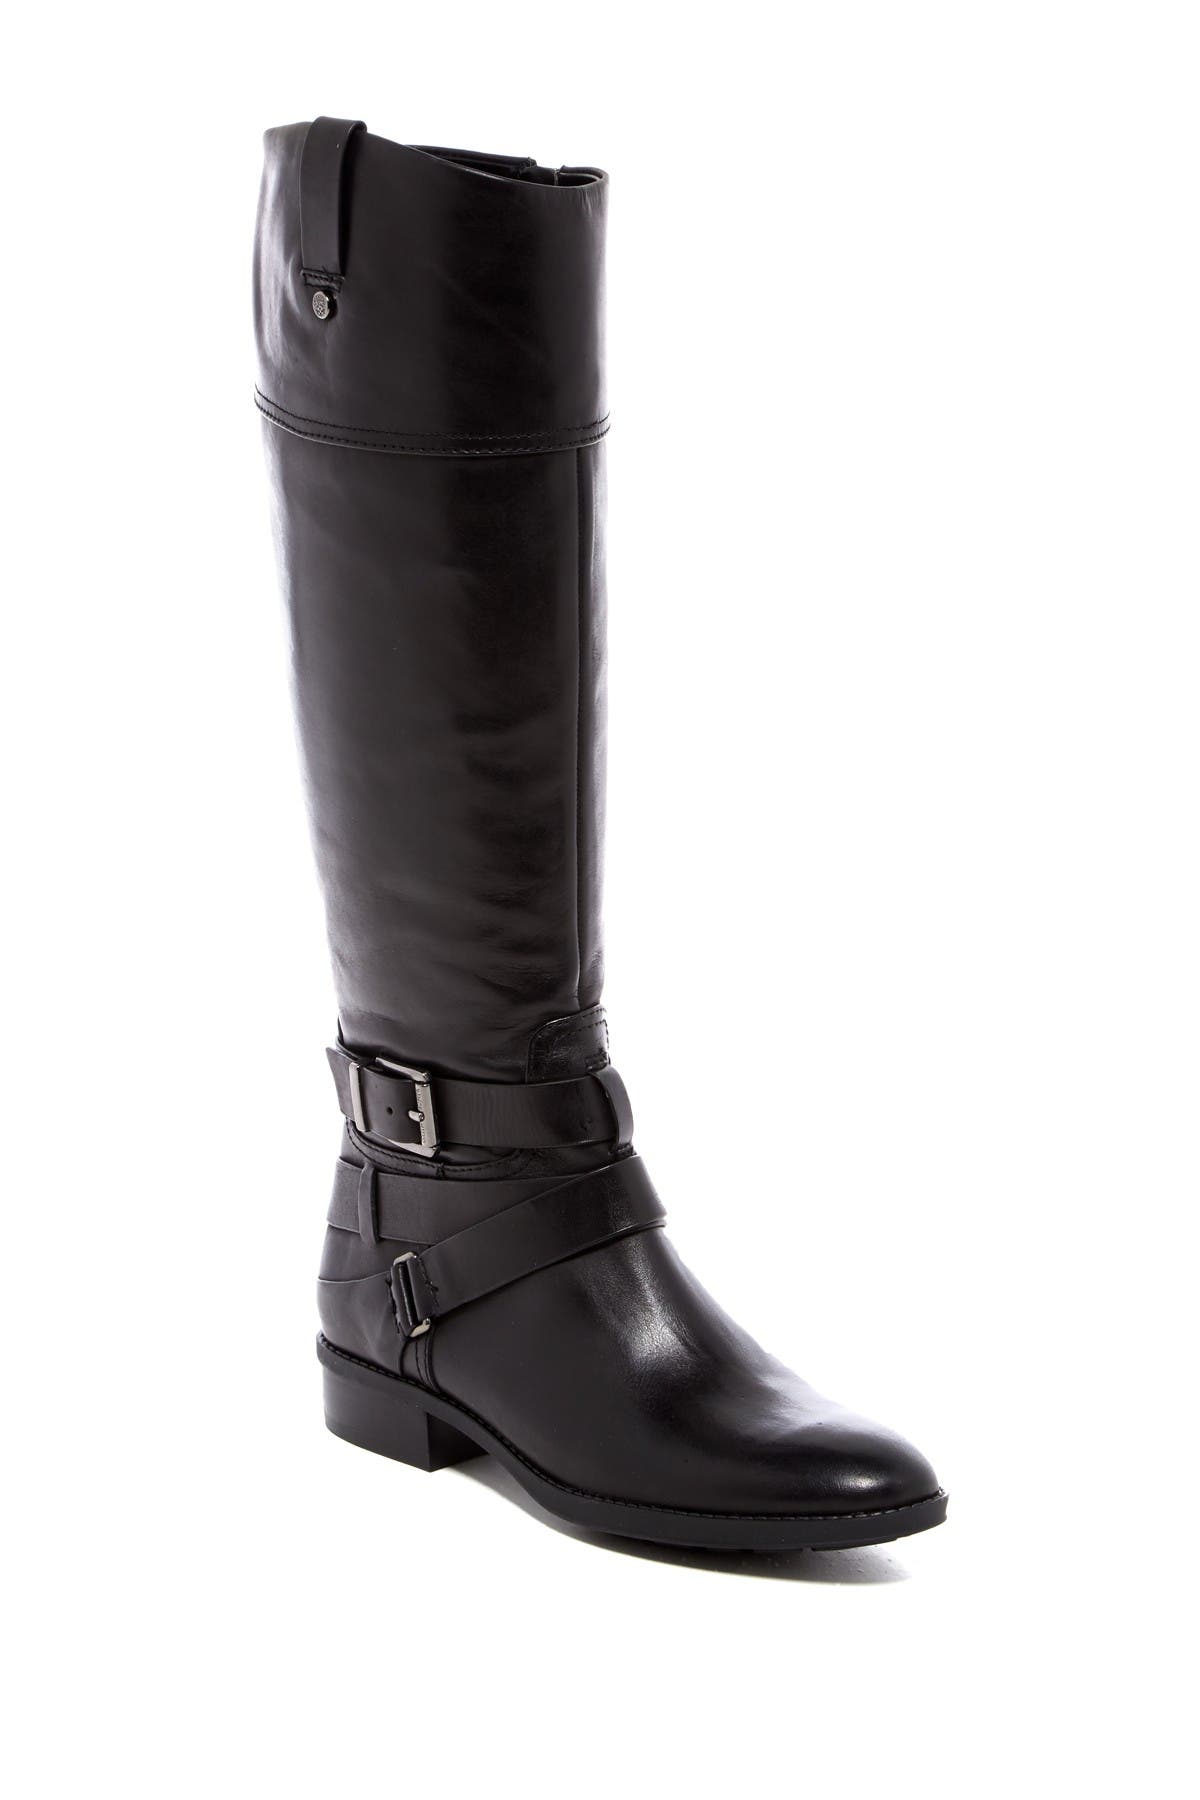 Vince Camuto | Pazell Tall Boot | Nordstrom Rack